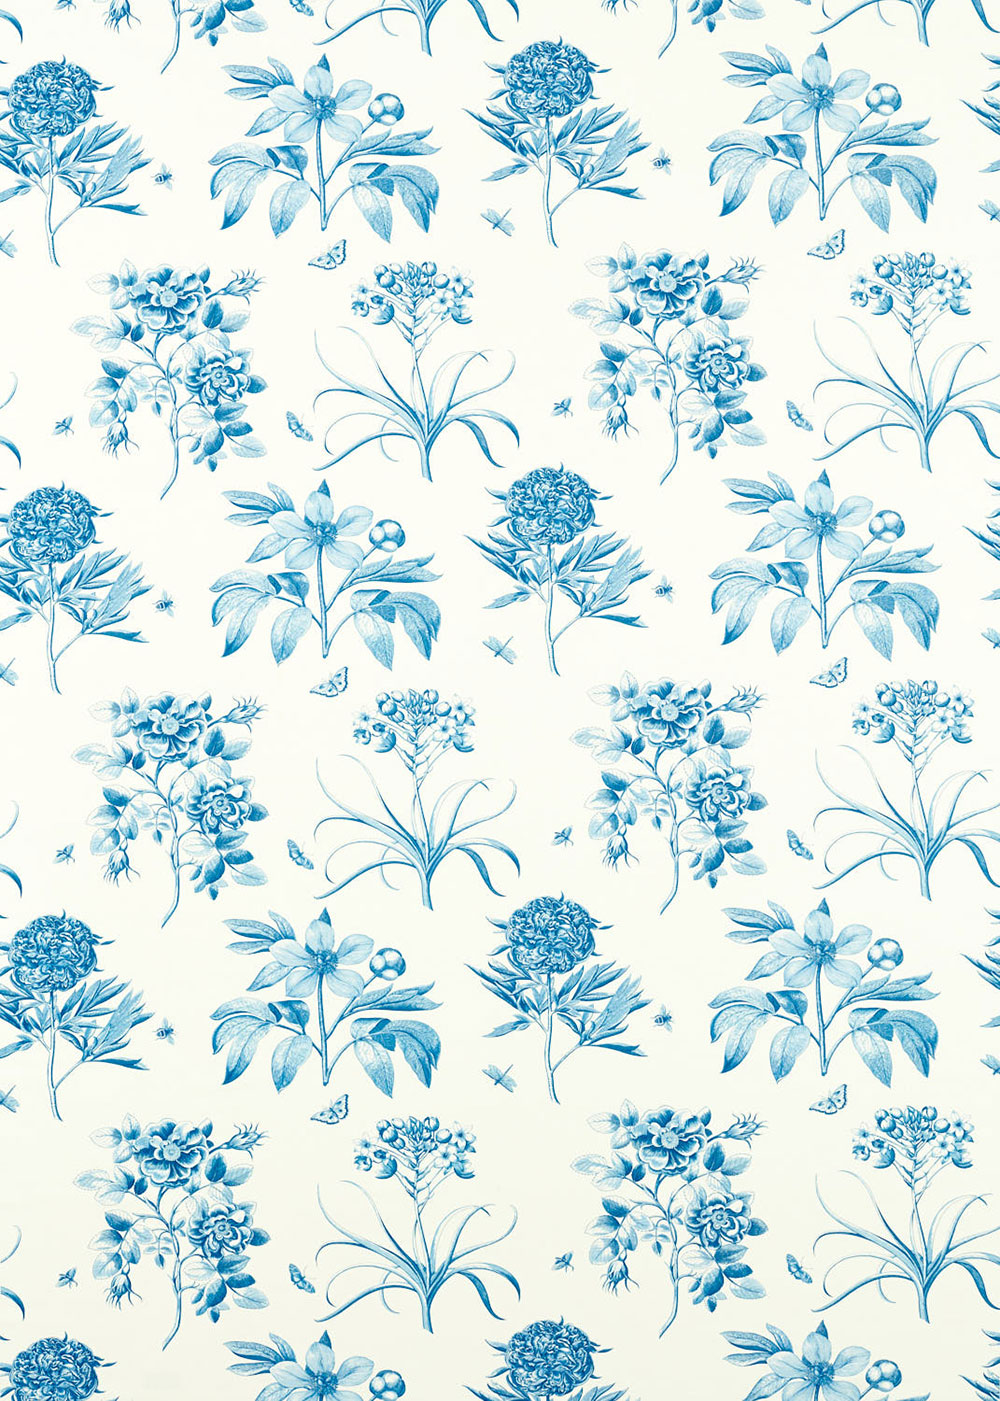 Etchings & Roses Fabric - Blue - by Sanderson